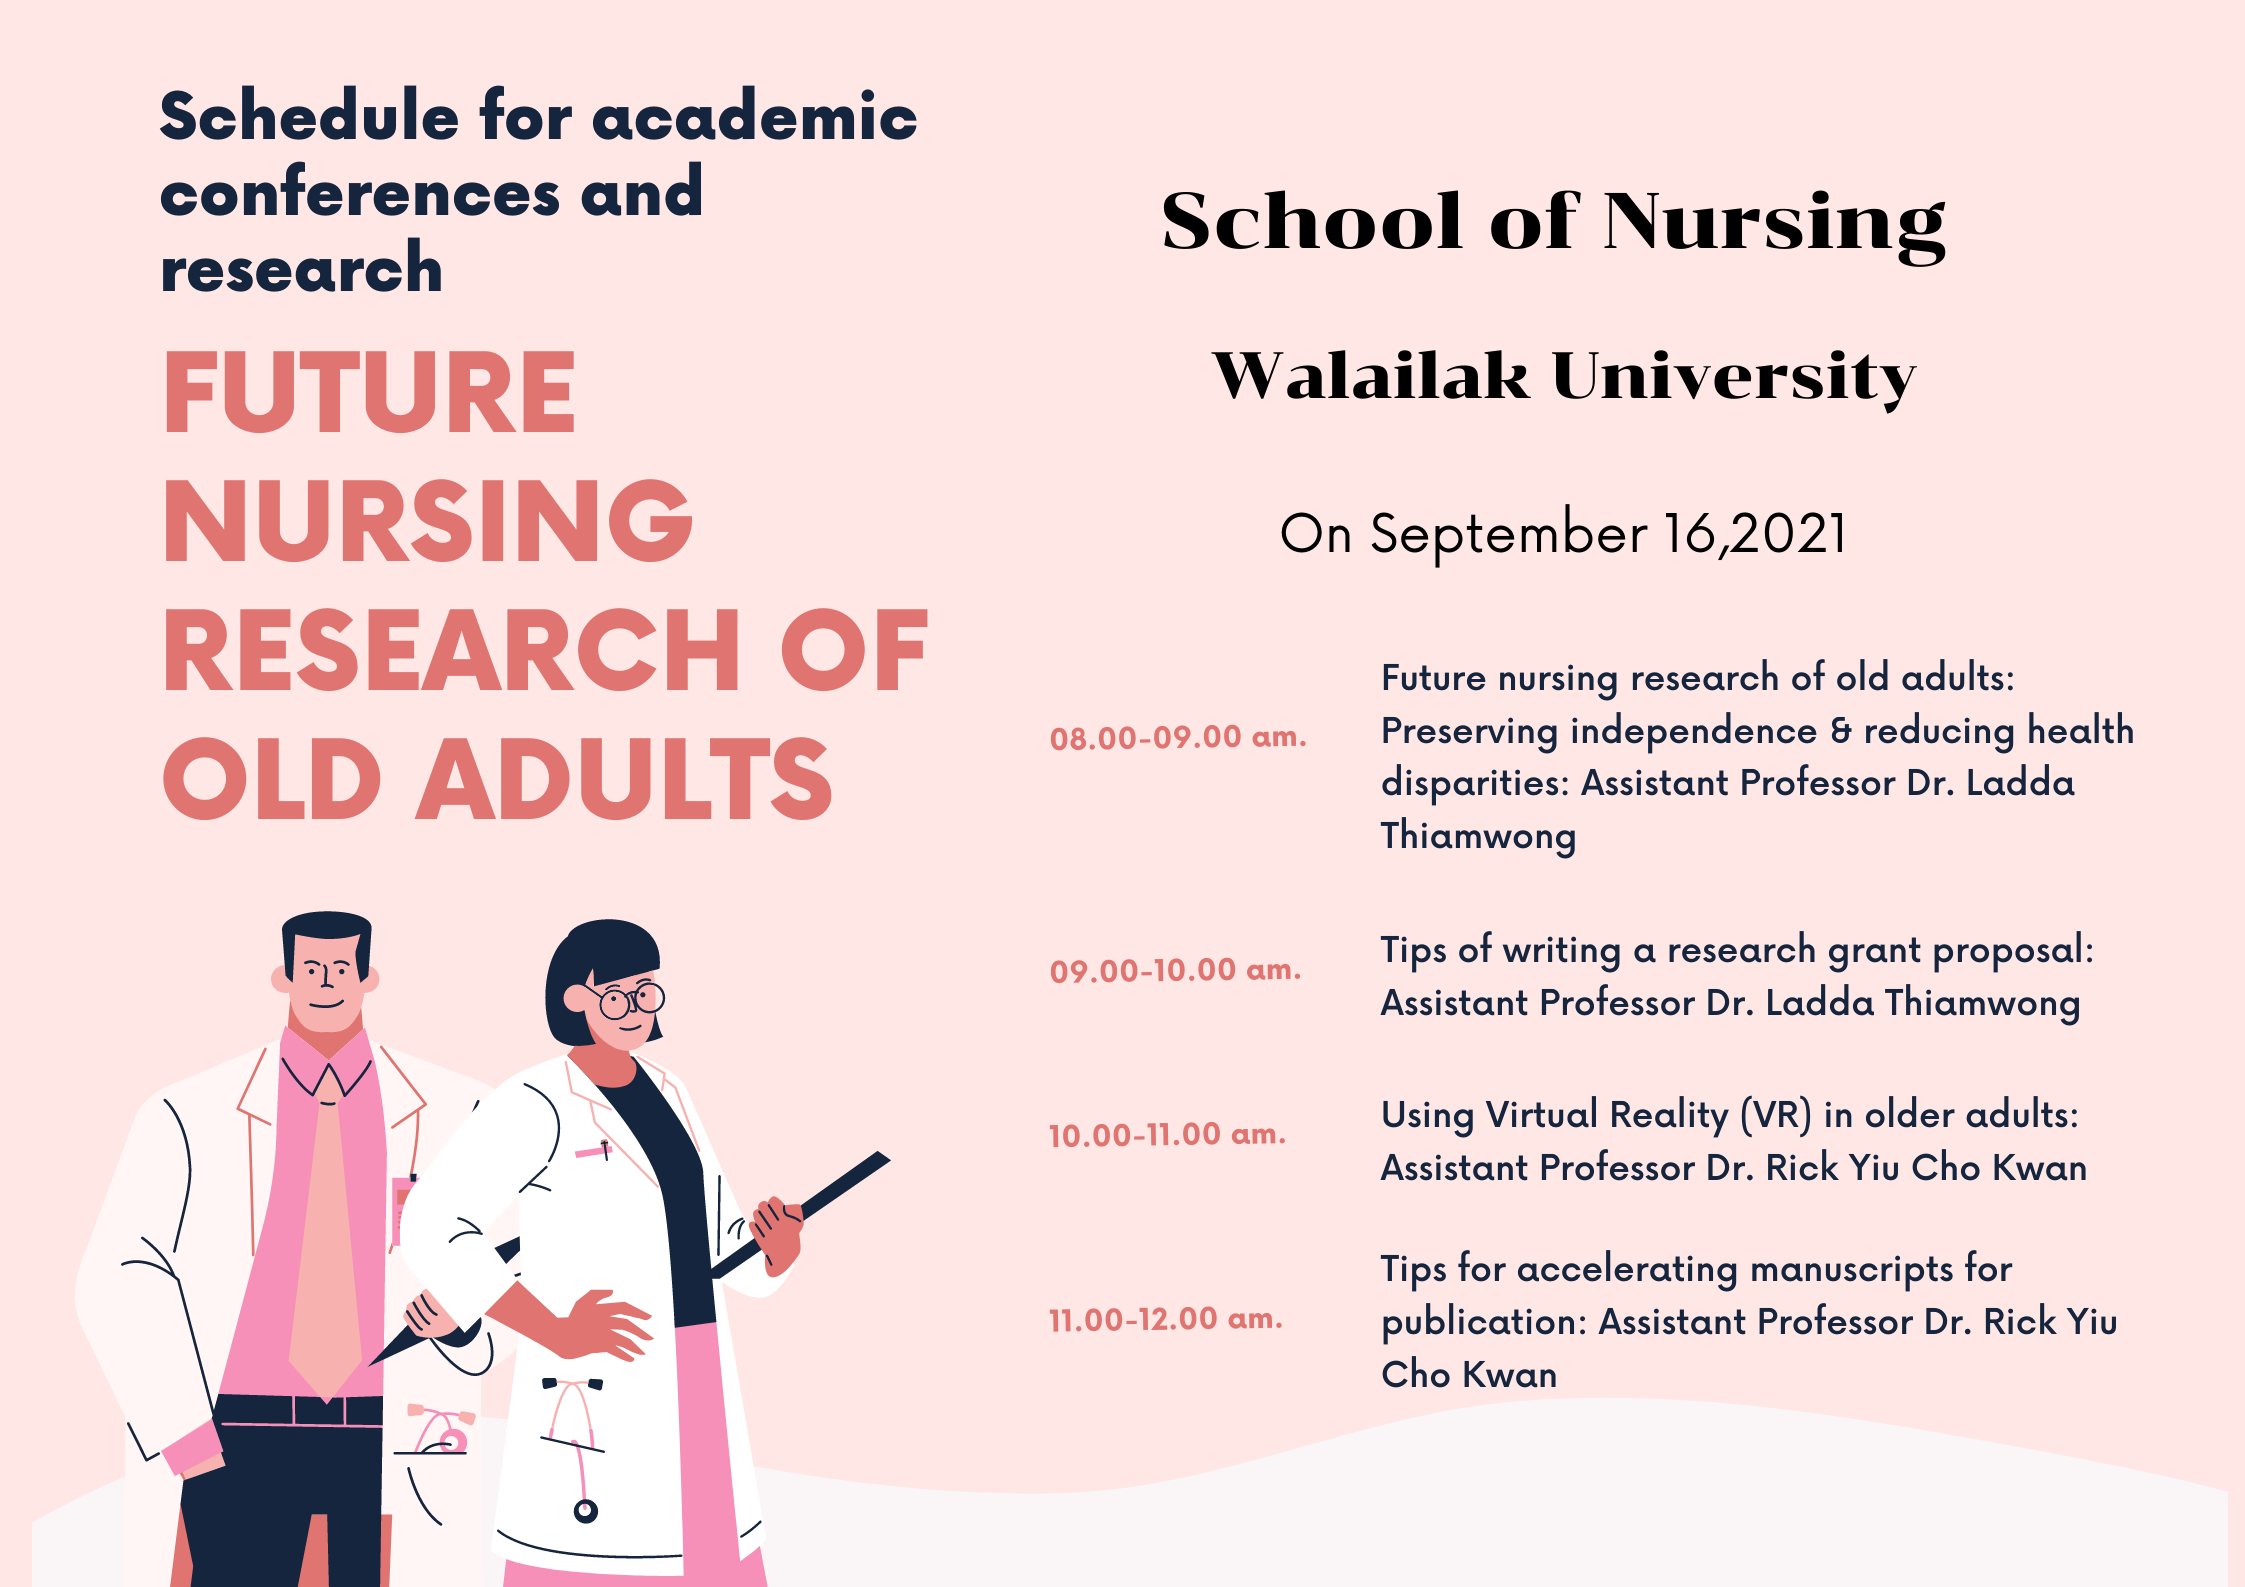 " Future nursing research of old adults"